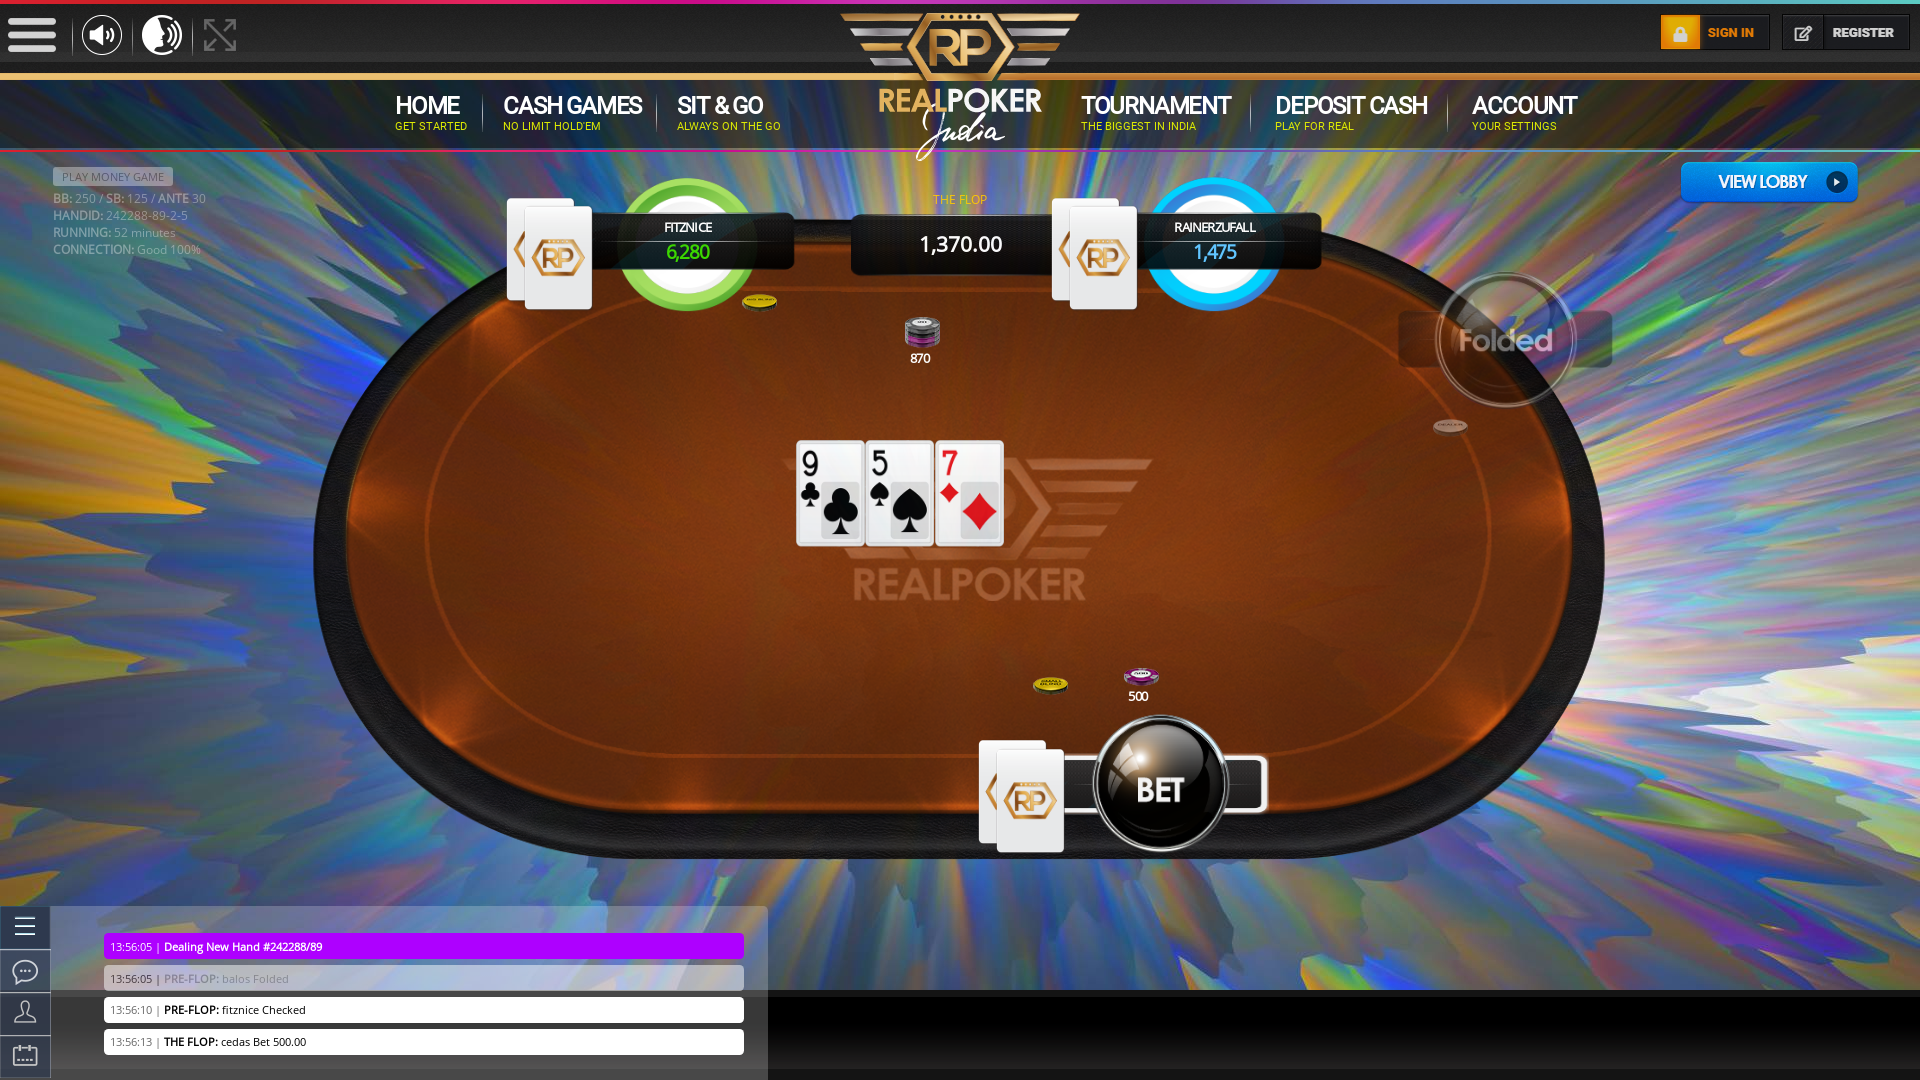 Real poker on a 10 player table in the 52nd minute of the game